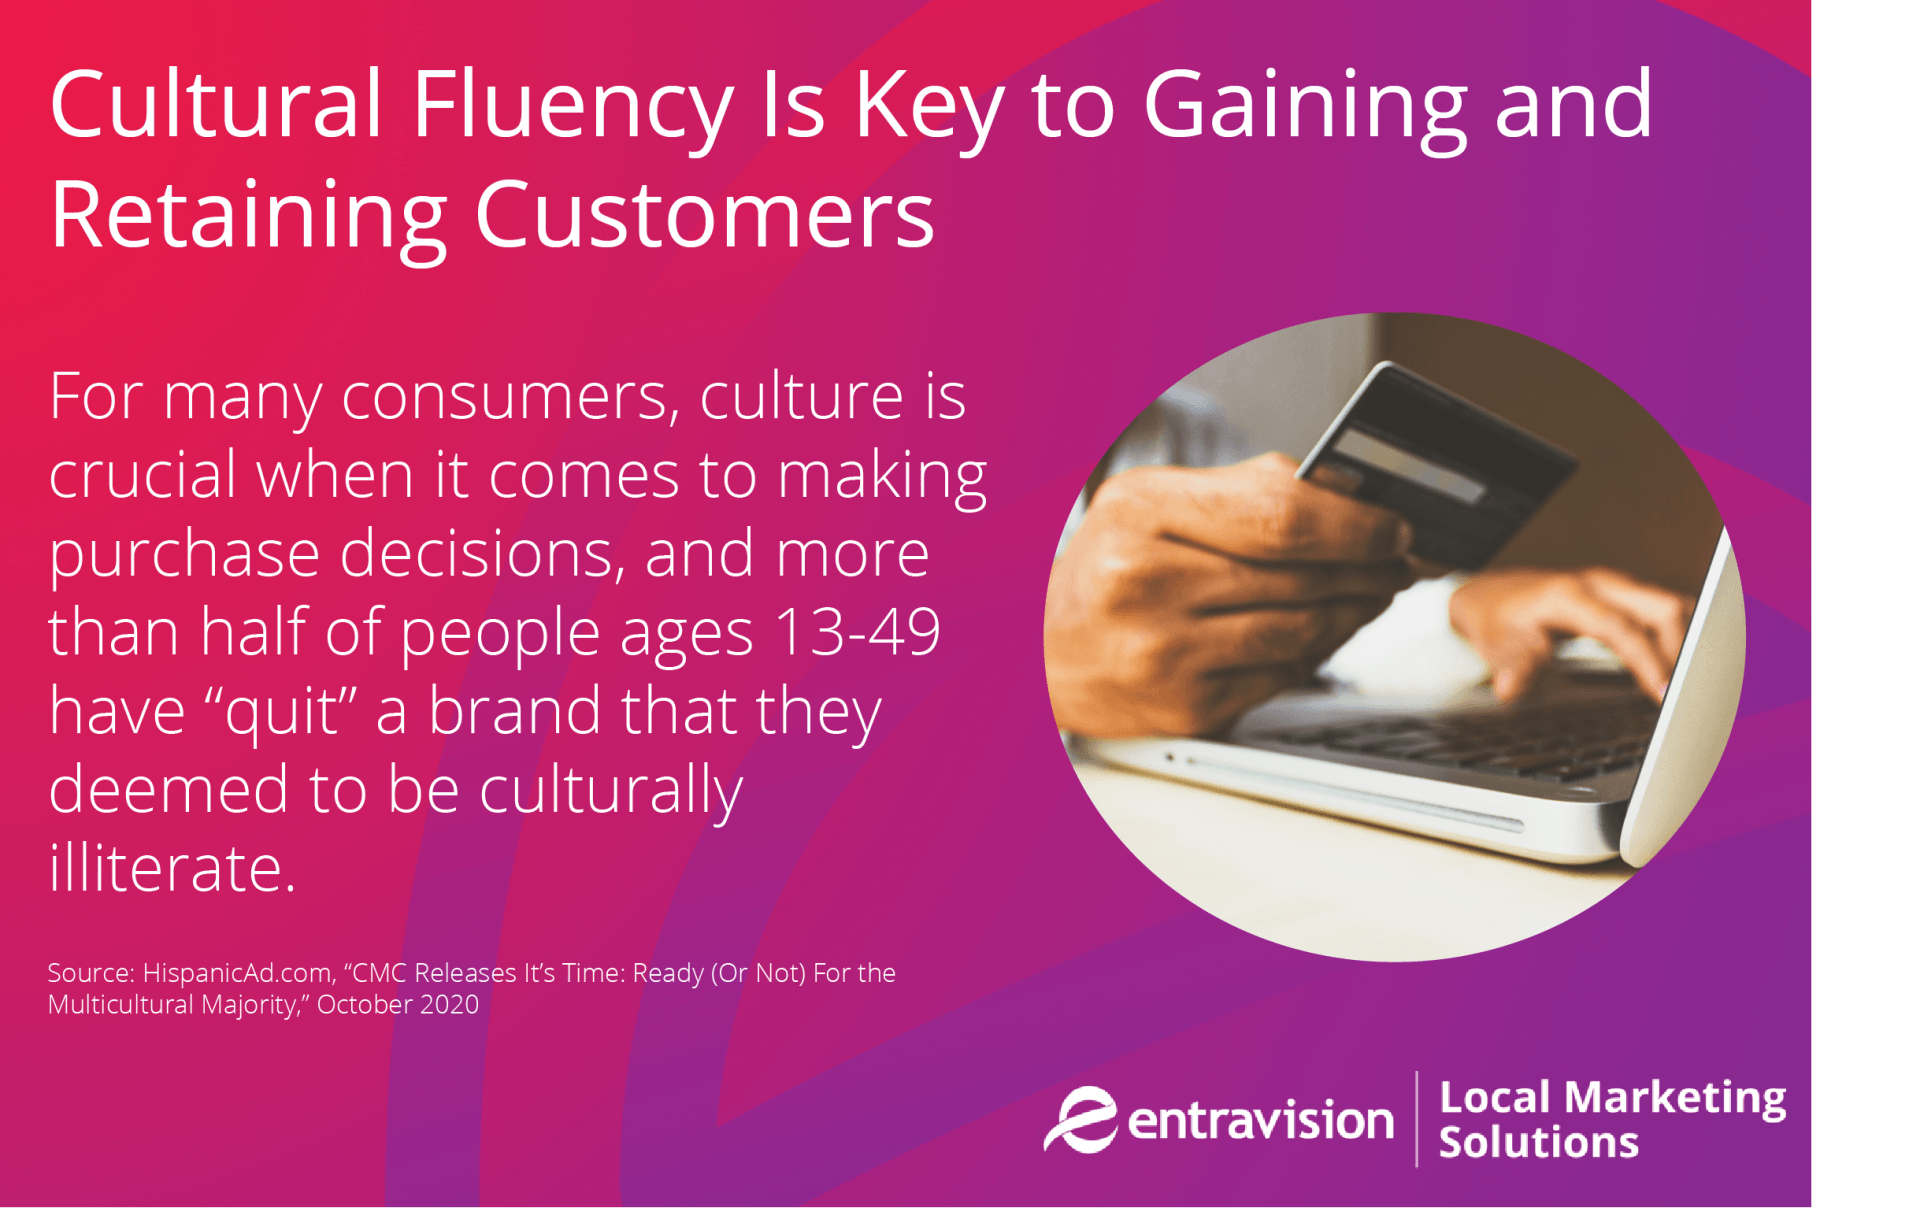 Cultural fluency is an increasingly important trait for businesses to have when using multicultural marketing to reach multicultural consumers.